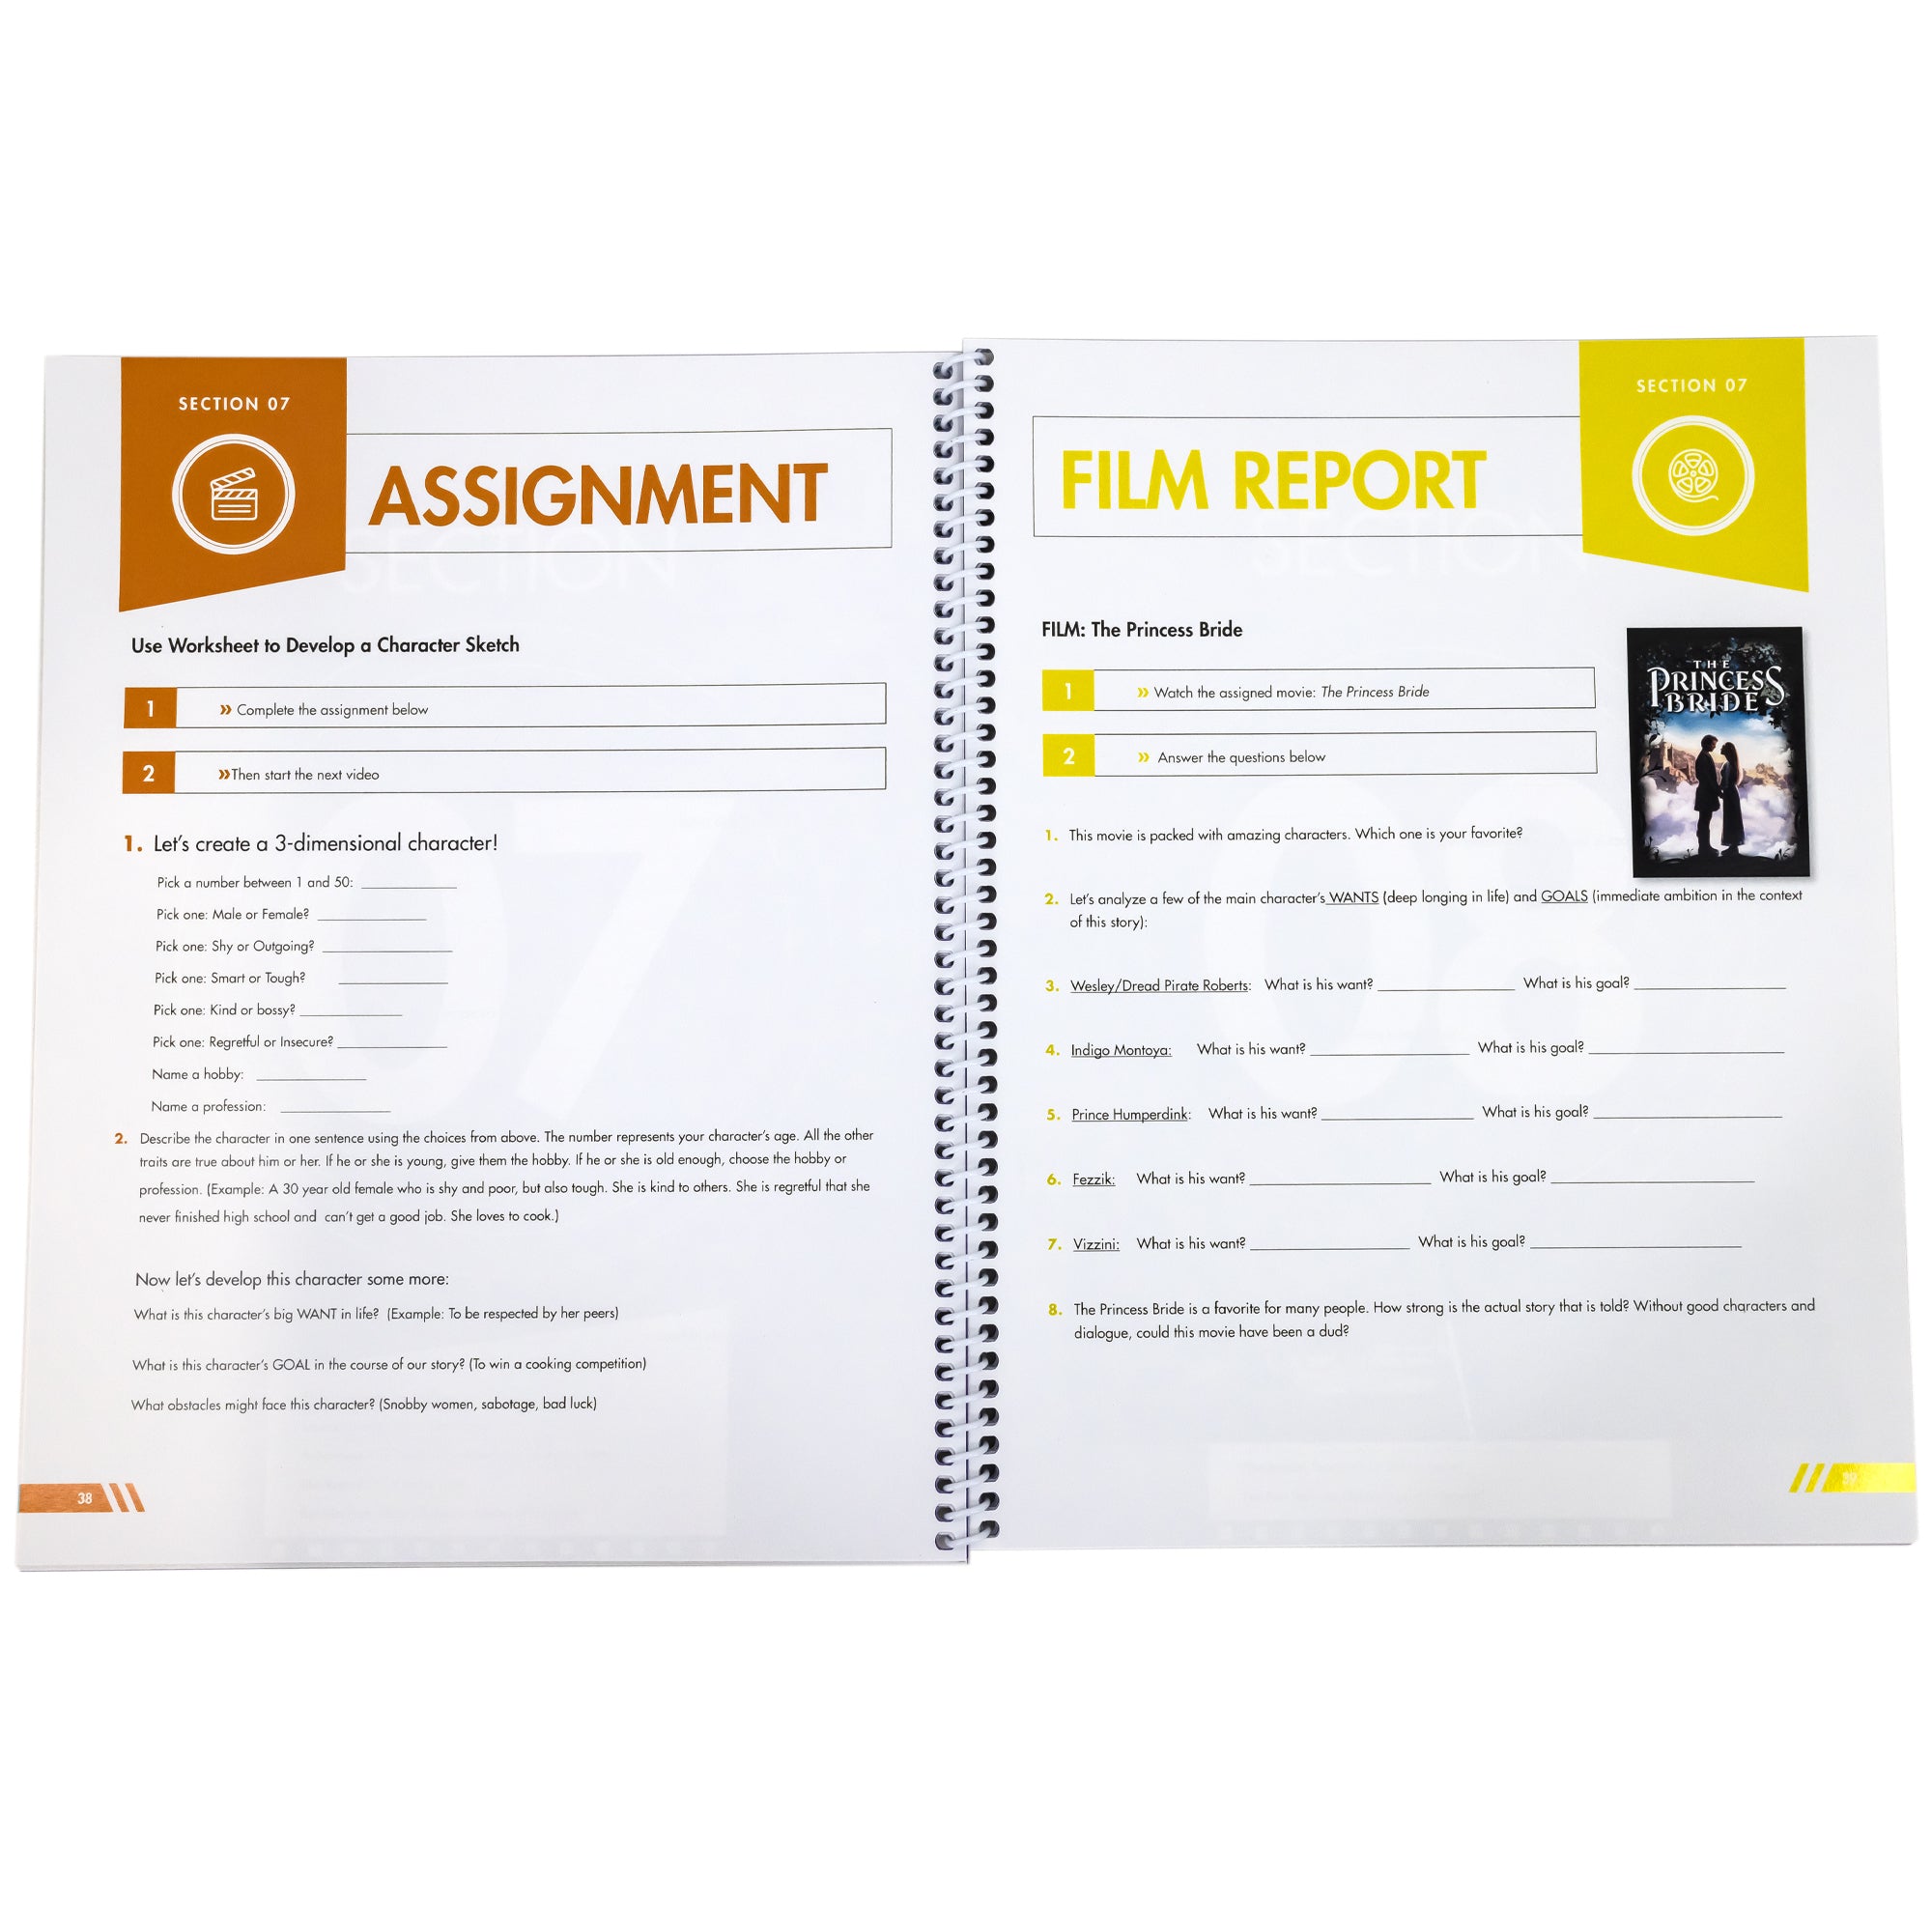 The spiral bound Intro to Filmmaking is open to show the "Assignment" on the left page that will have you "develop a character sketch." On the right page is a "Film Report" that will have you watch "The Princess Bride" and answer questions about the film. 